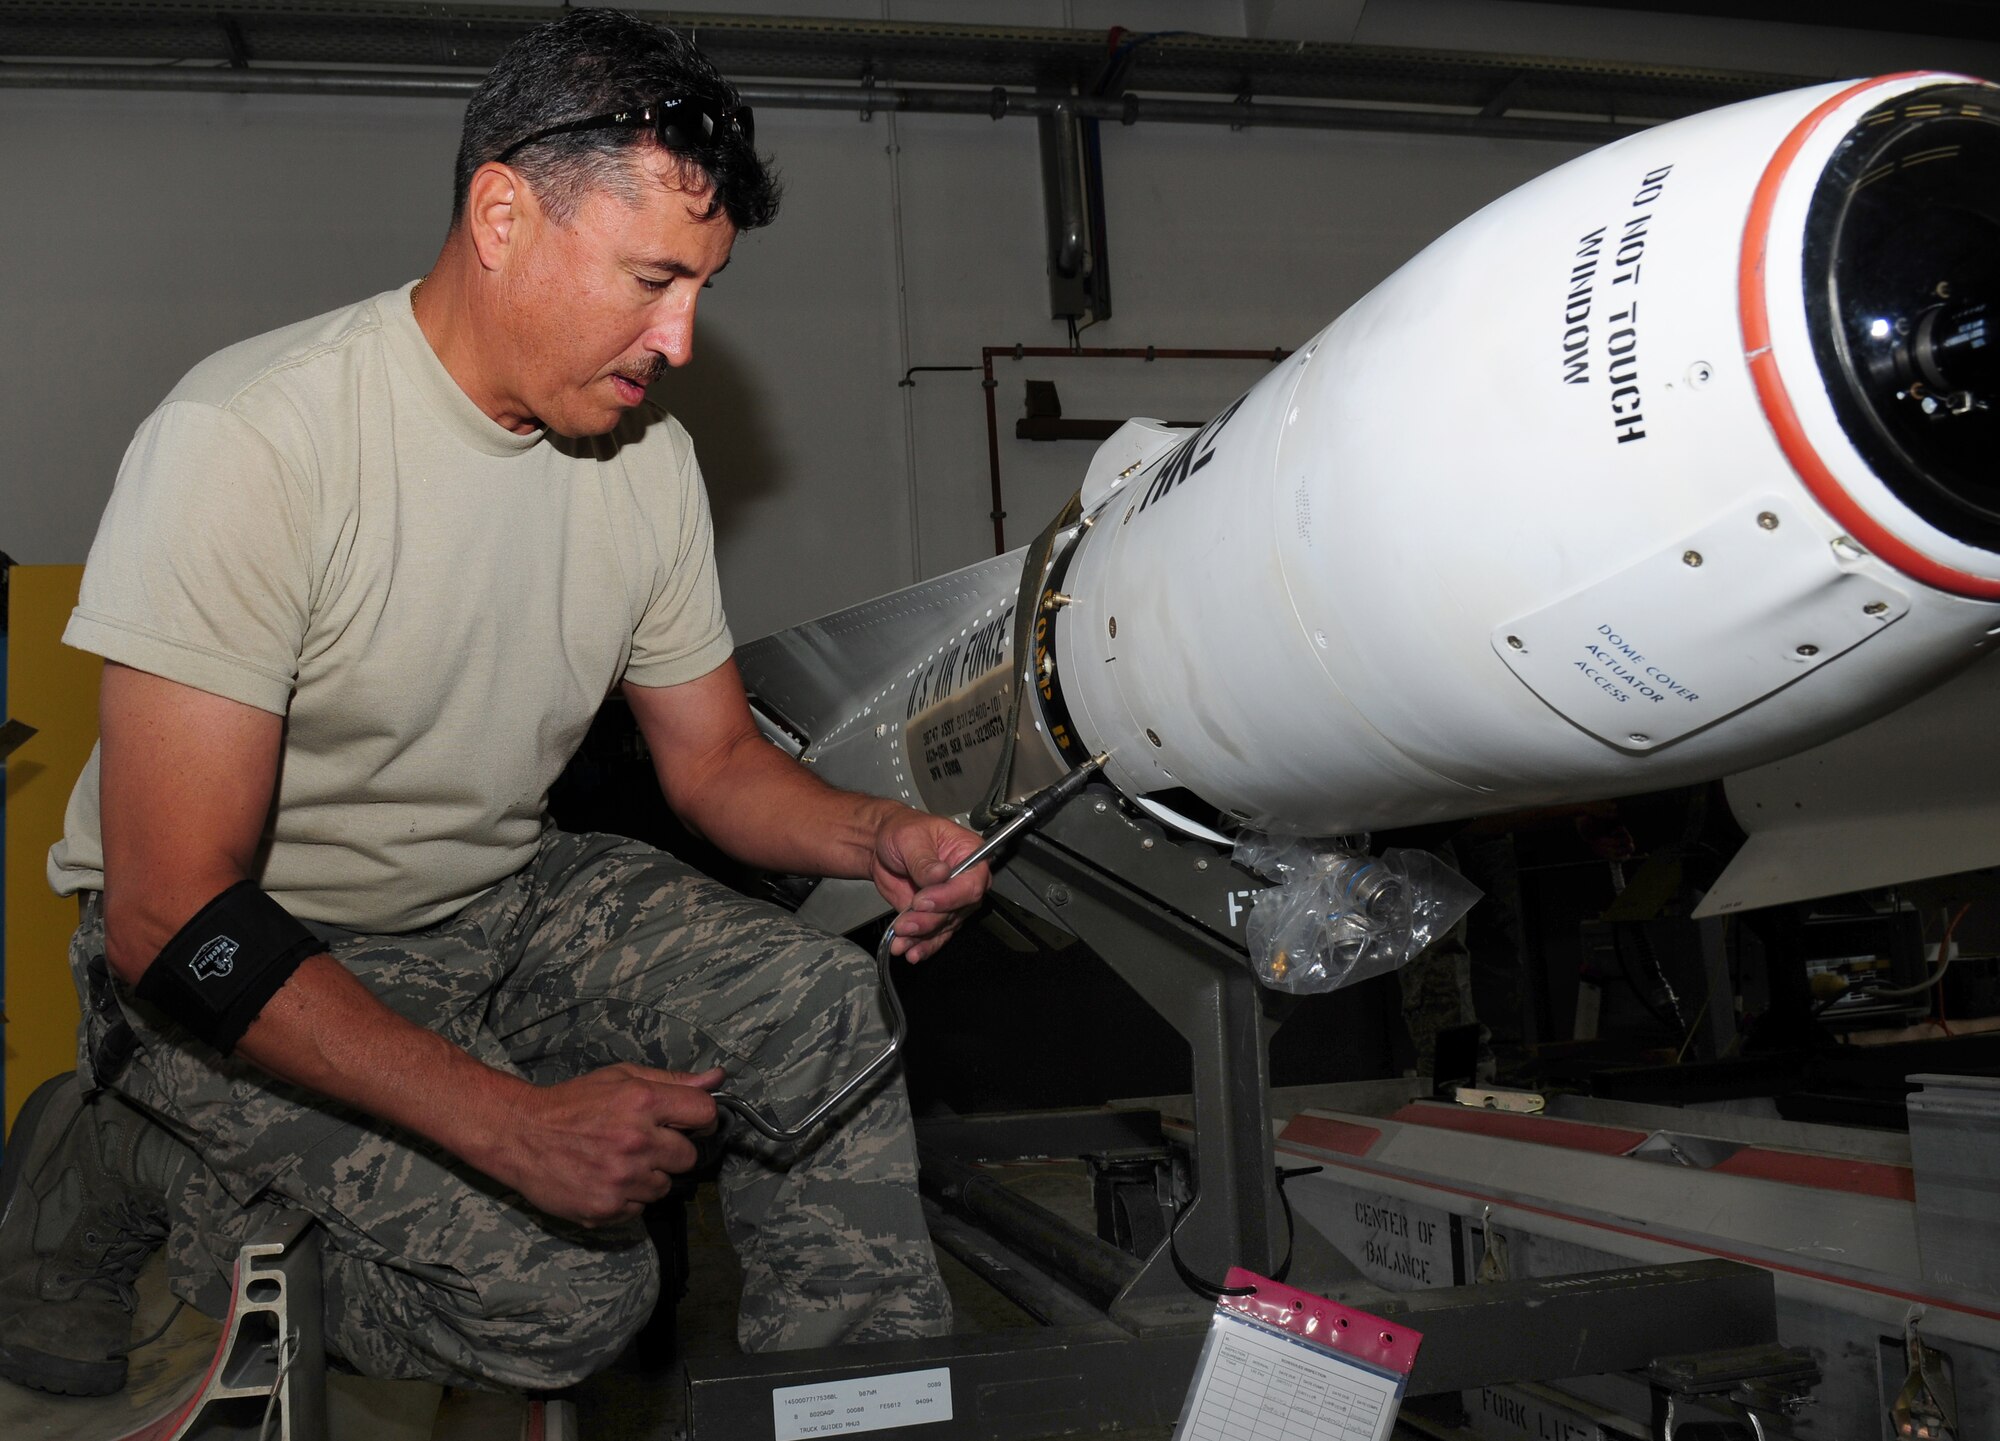 U.S. Air Force Master Sgt. Eugene Rinaldi, Air Force Reserve Ammunition Team member, removes the guidance control section of an AGM-65 Maverick missile system for upgrades Aug. 11, 2009, Ramstein Air Base, Germany. Each missile weighs either 466 or 654 pounds, depending on the model. (U.S. Air Force photo by Staff Sgt. Jocelyn Rich)